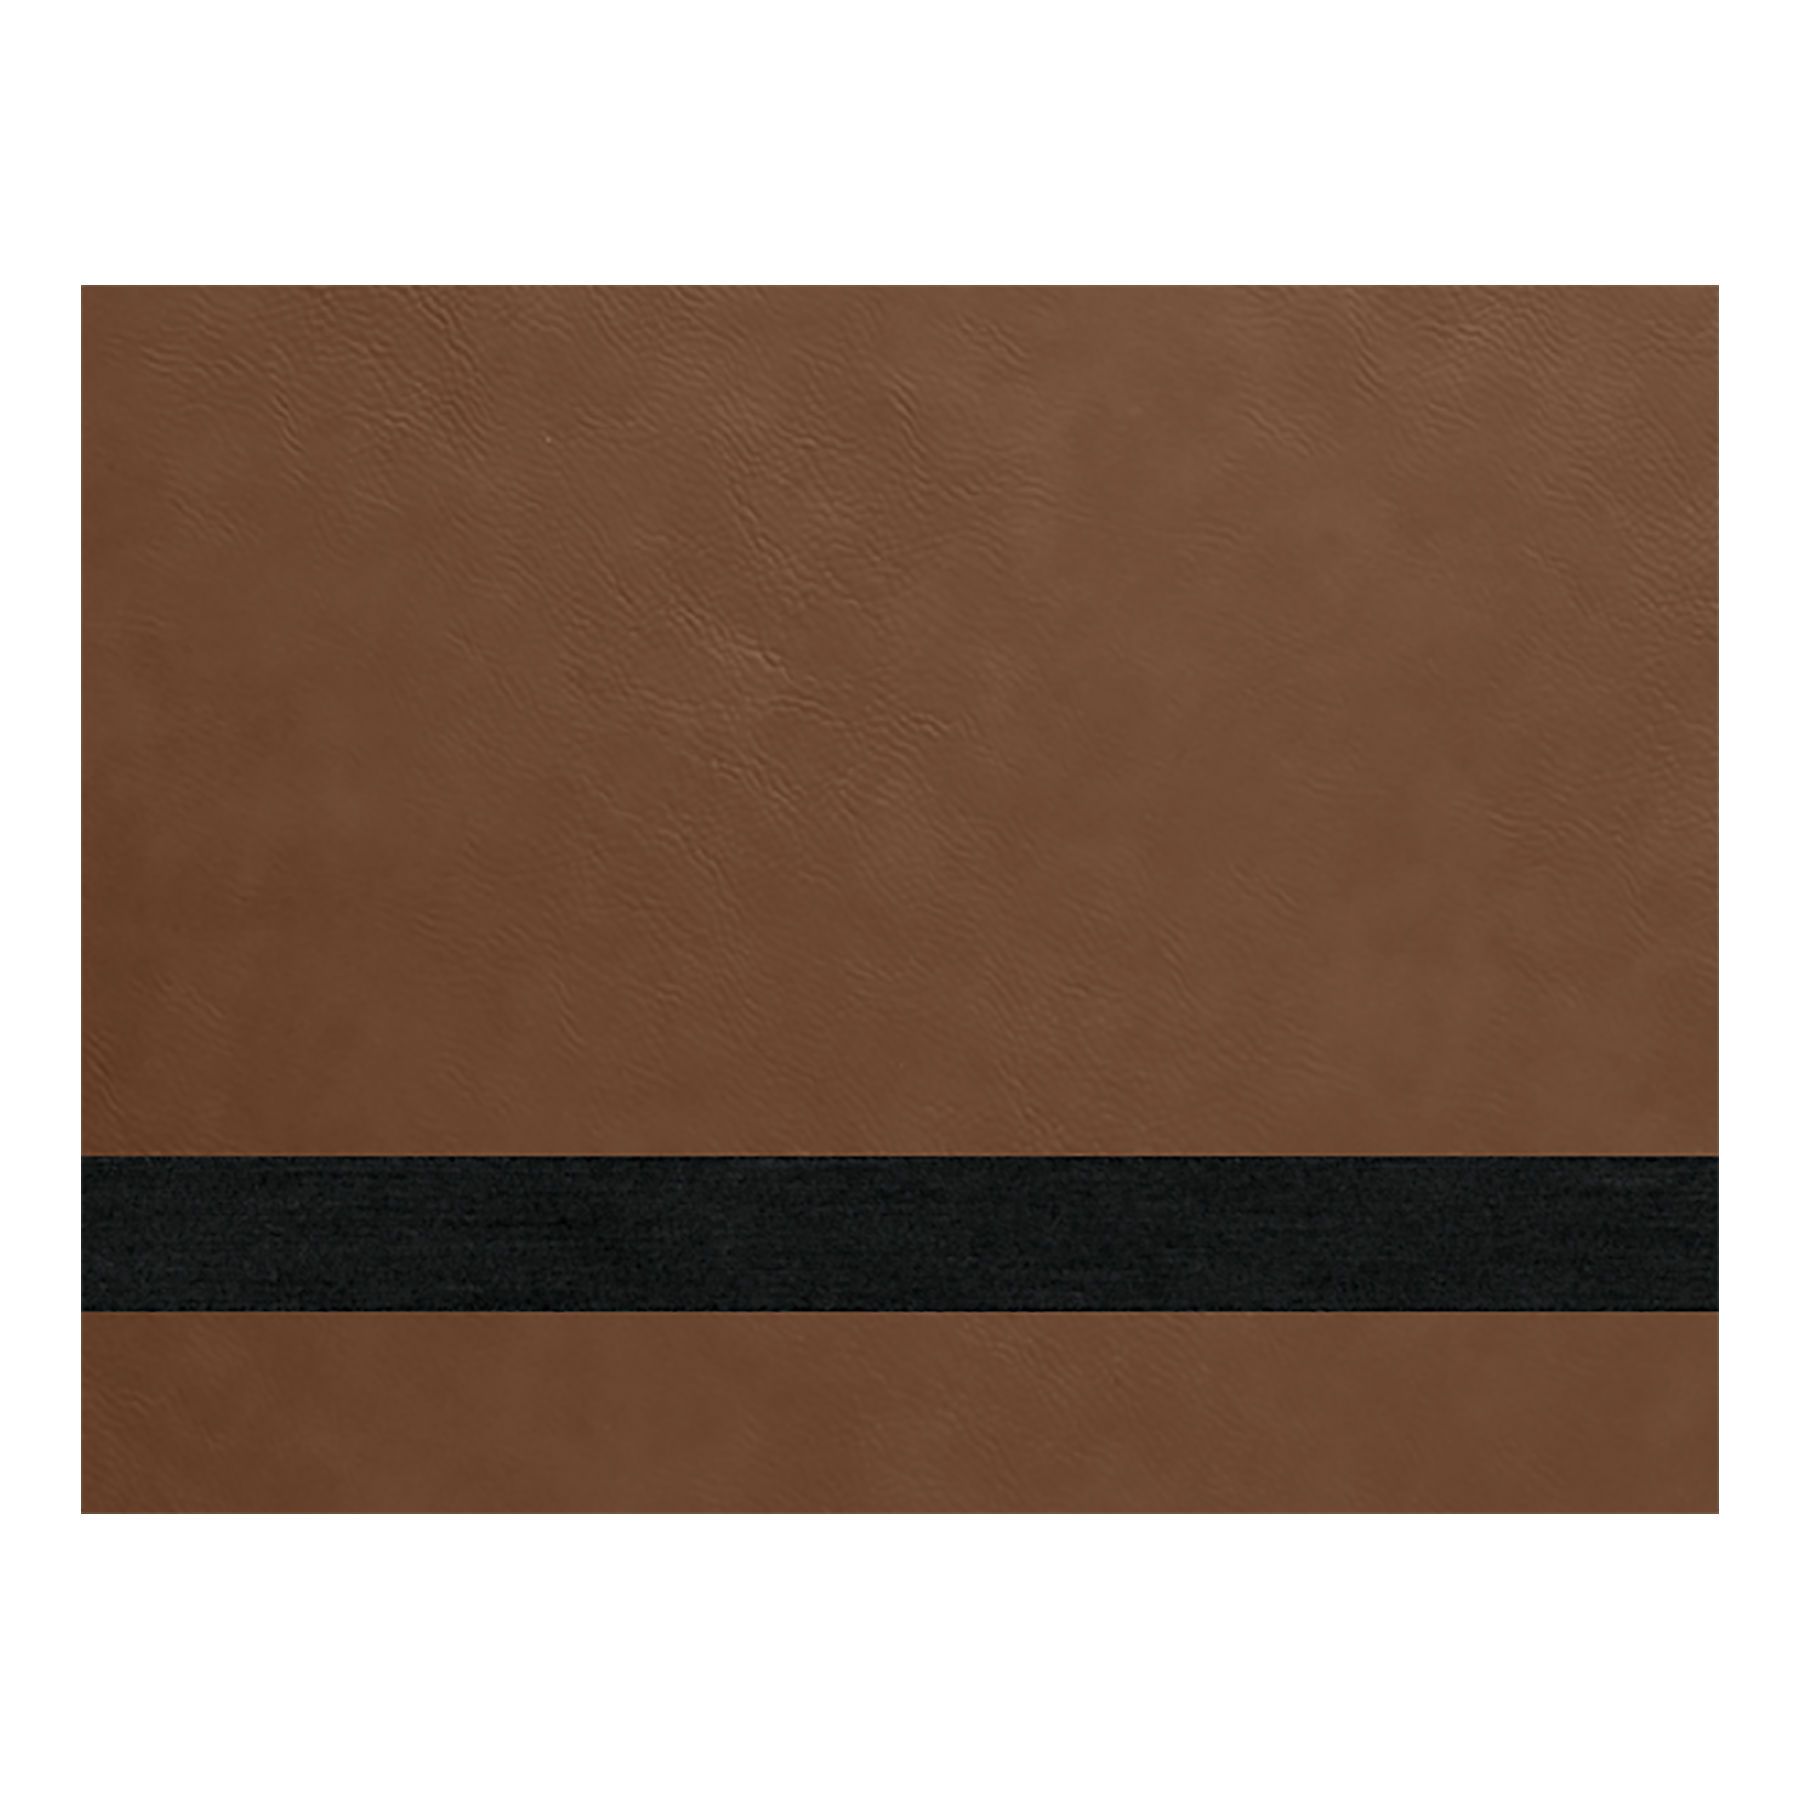 PRE-ORDER! Full Size Laserable Leatherette Sheet Stock, Boss Laser Engravers (Available Jan. 2022) Engraving Supplies Craftworks NW LS-1630 (29" x 15") Dark Brown/Black 